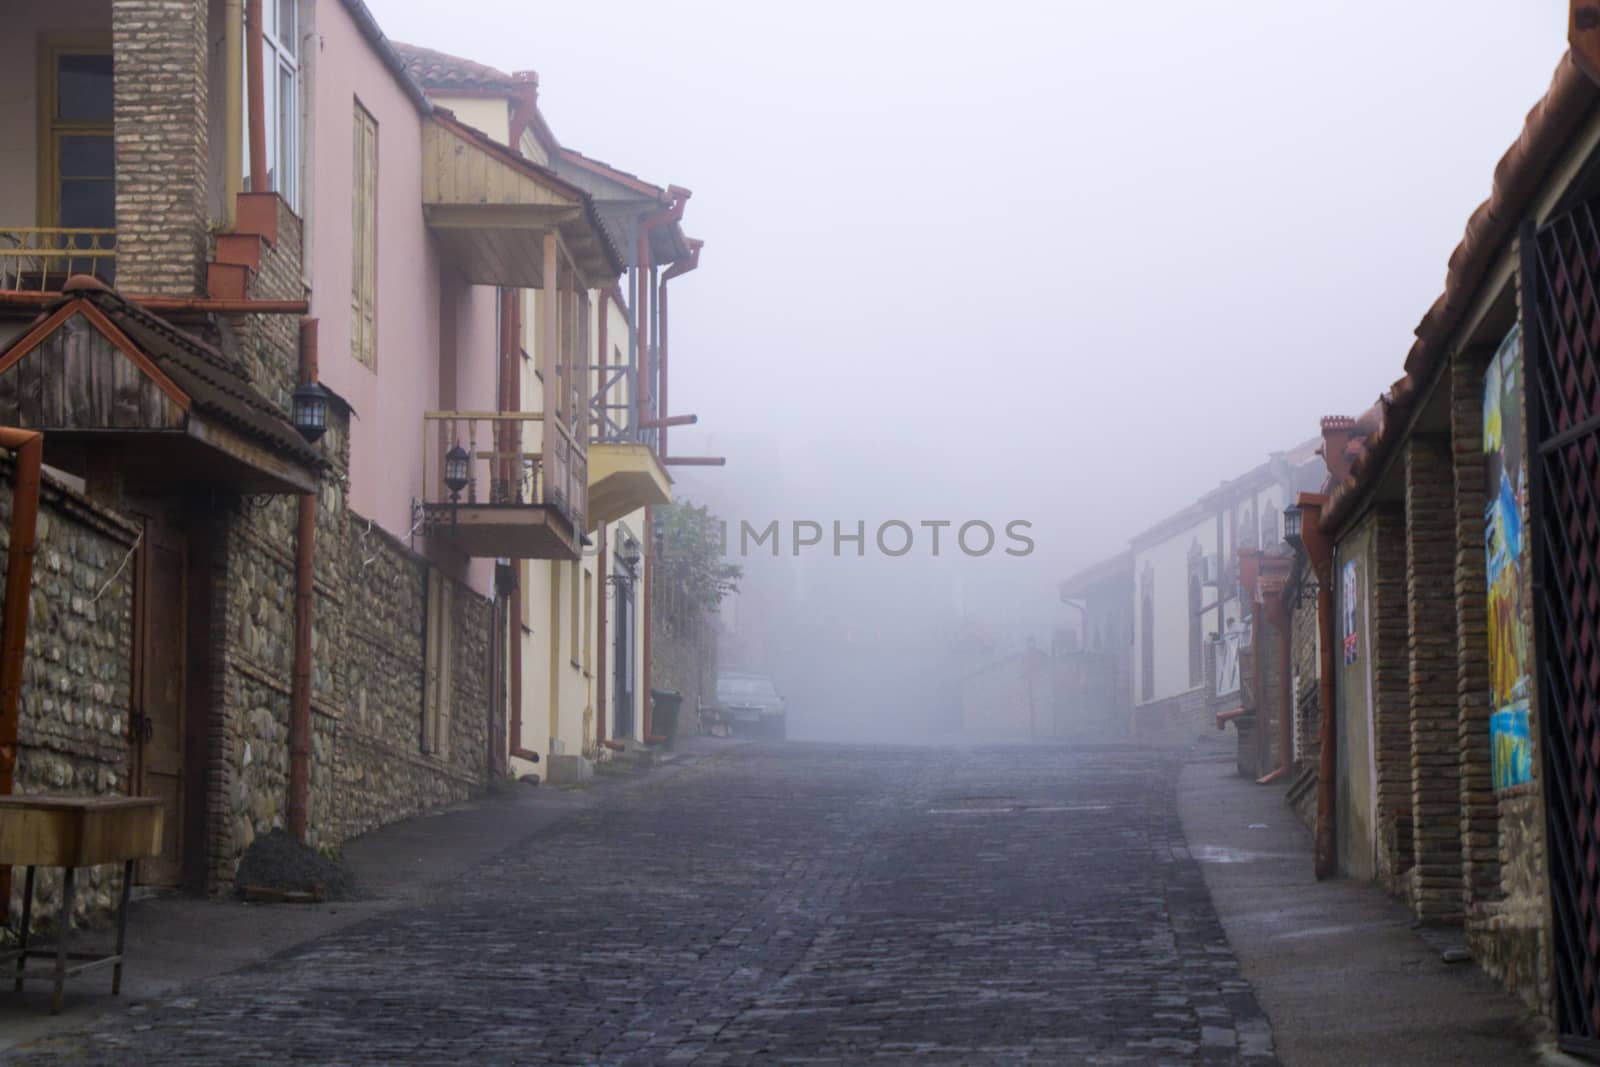 Sighnaghi village landscape and city view in Kakheti, Georgia. Old houses beautiful view during mist and fog